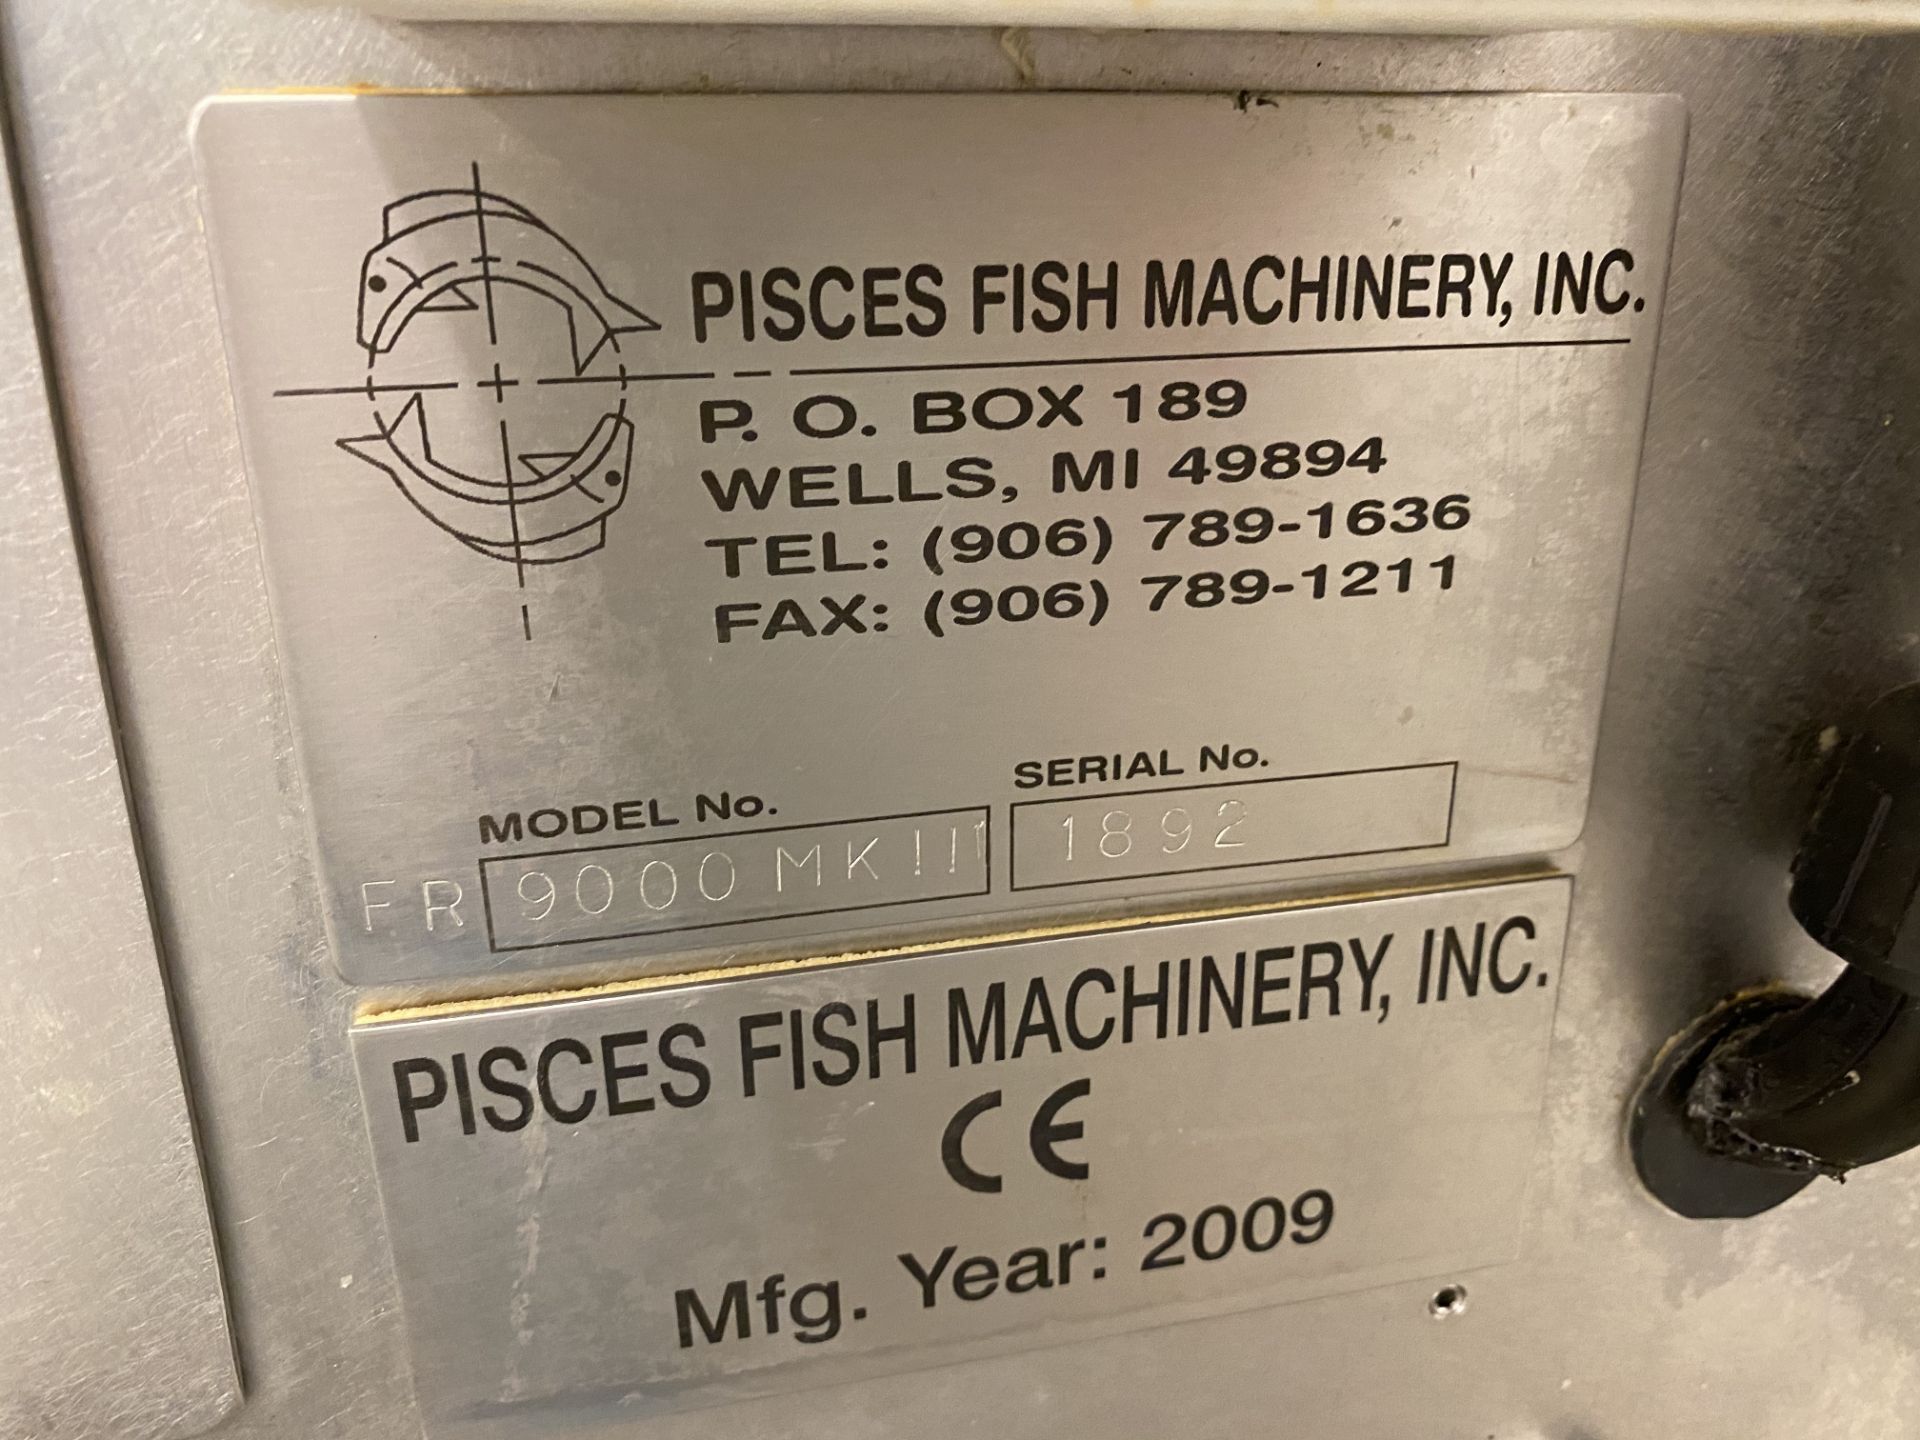 Pisces #FR9000 MKII Salmon Splitter MFG 2009 Dual 9"+11" Blades w/ Touch Panel Control SN# 1892 - Image 7 of 10